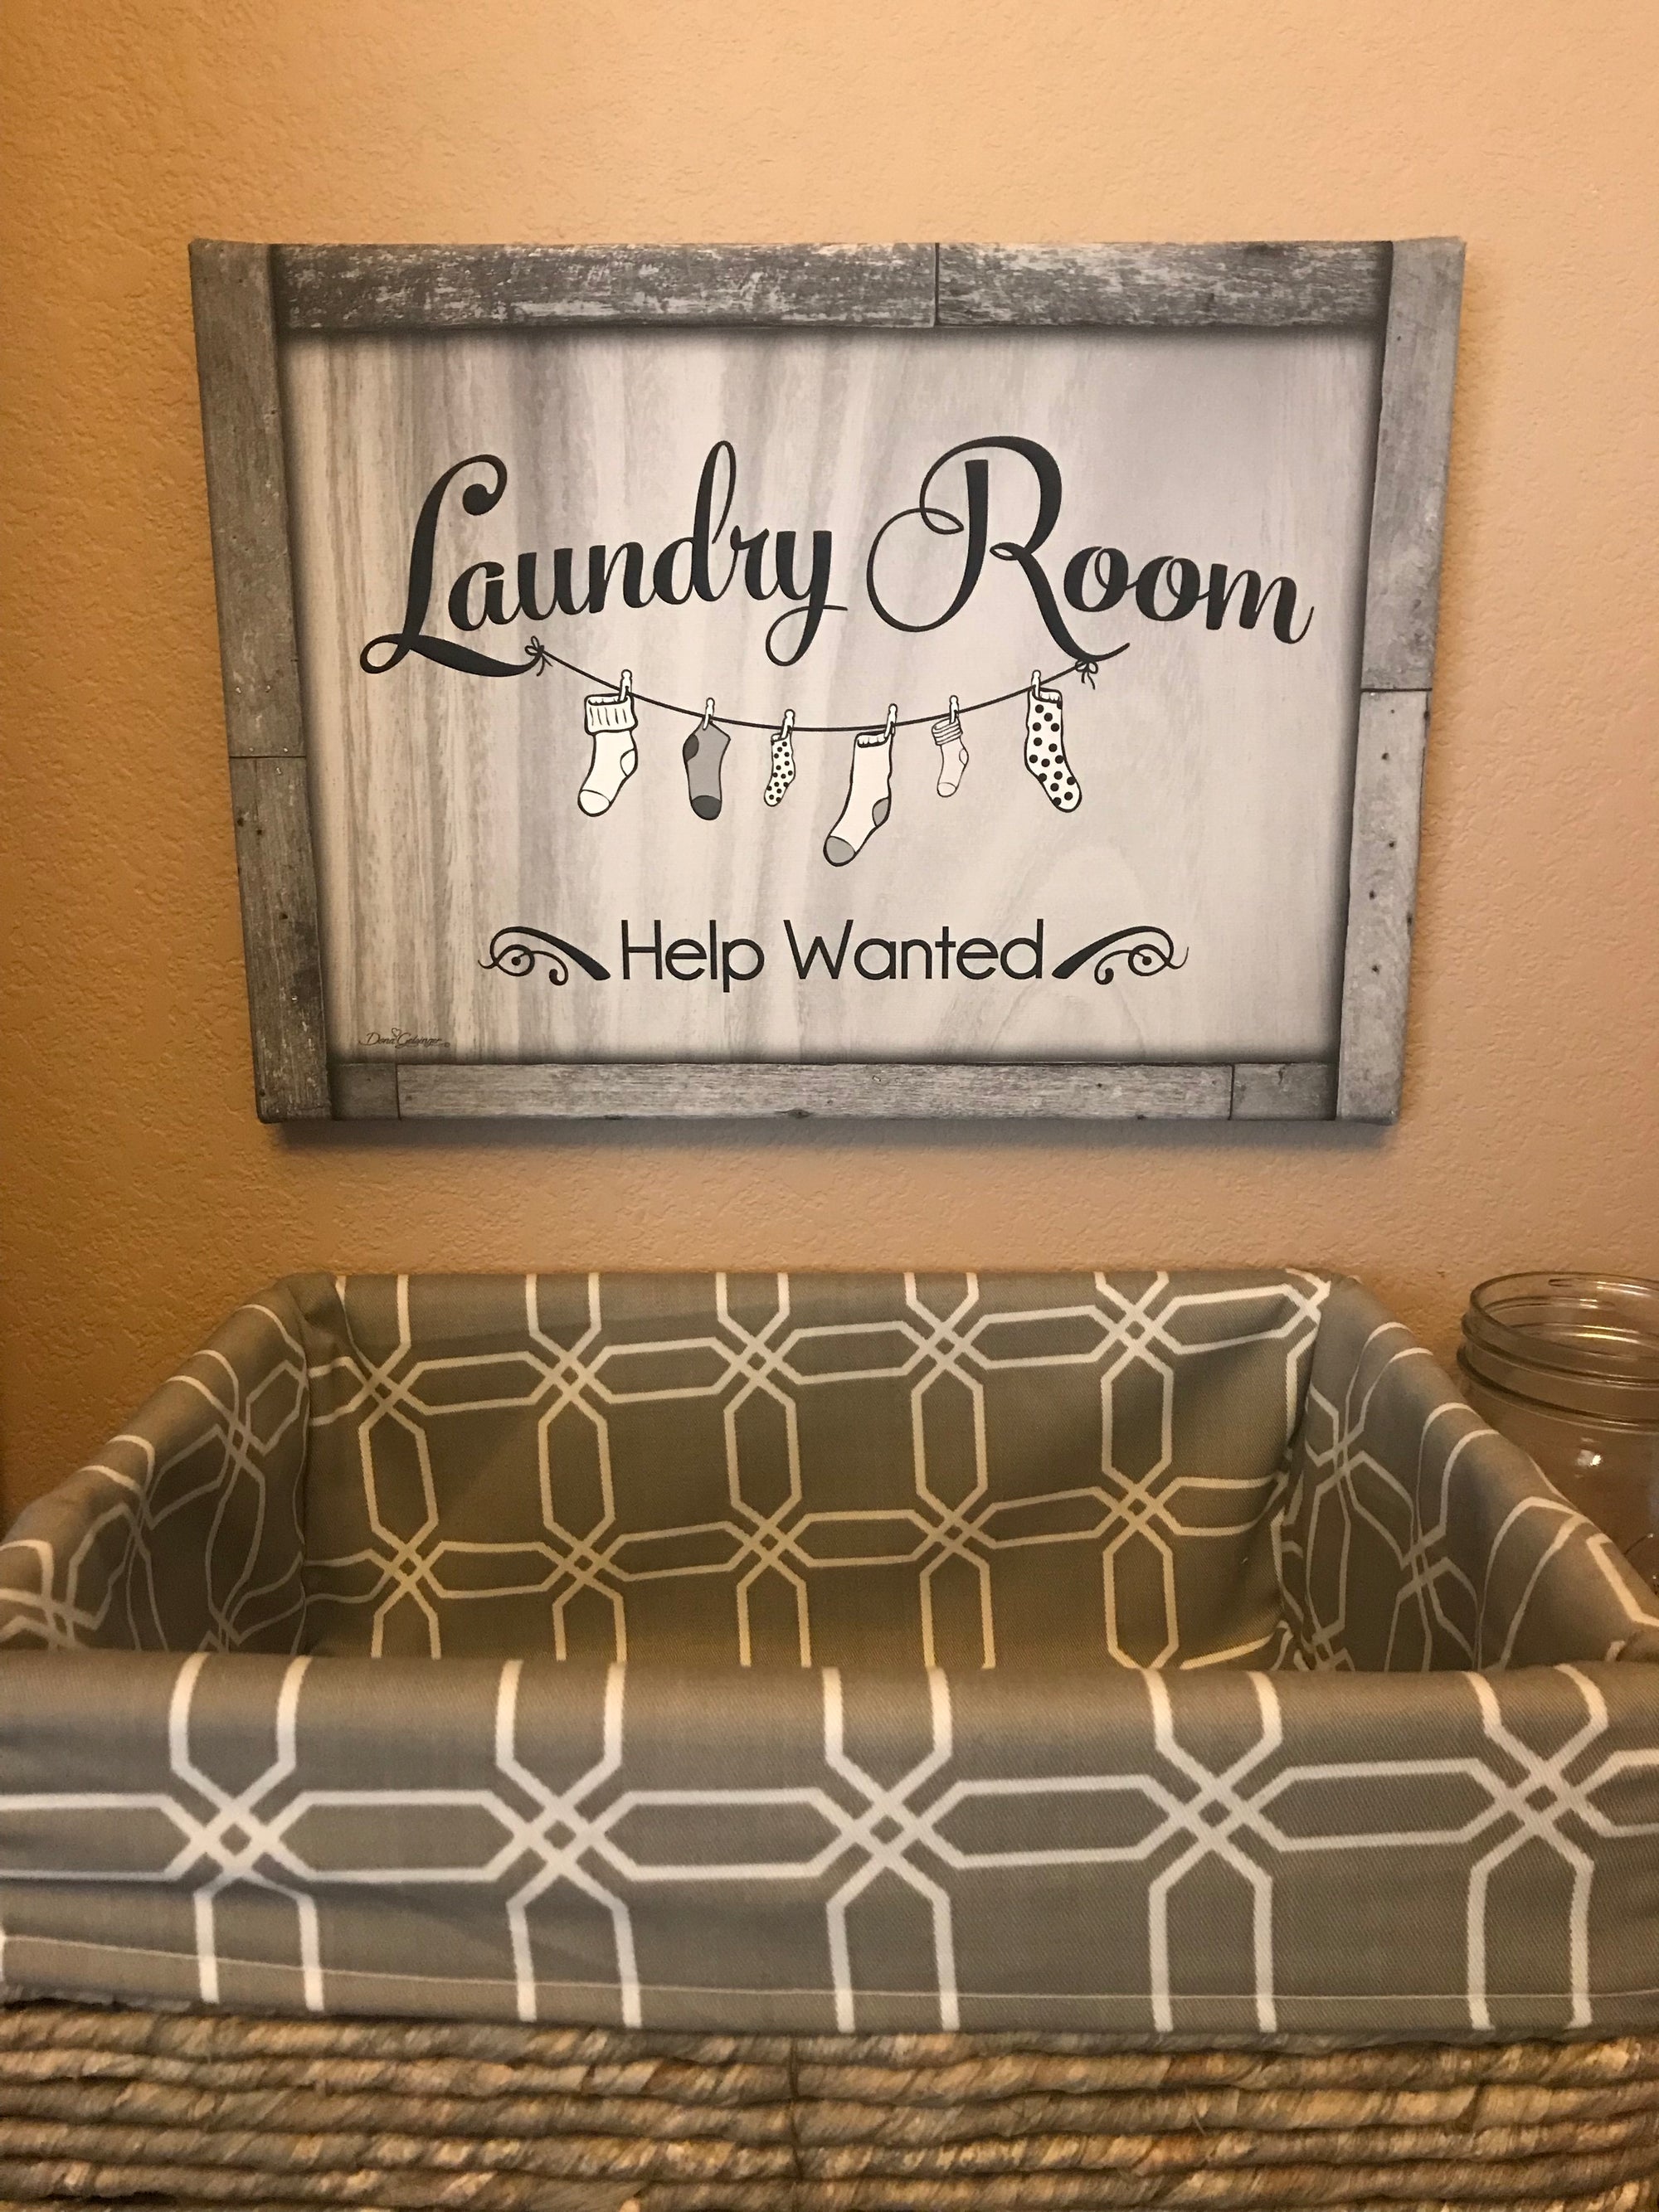 Featuring a playful design of a laundry line with socks pinned to it, the L and R are cleverly connected to the line, adding a touch of whimsy to the piece.  Hang this canvas on your laundry room wall and let the fun and romantic vibe flow in! The text "Laundry Room Help Wanted" is written in a beautiful font.